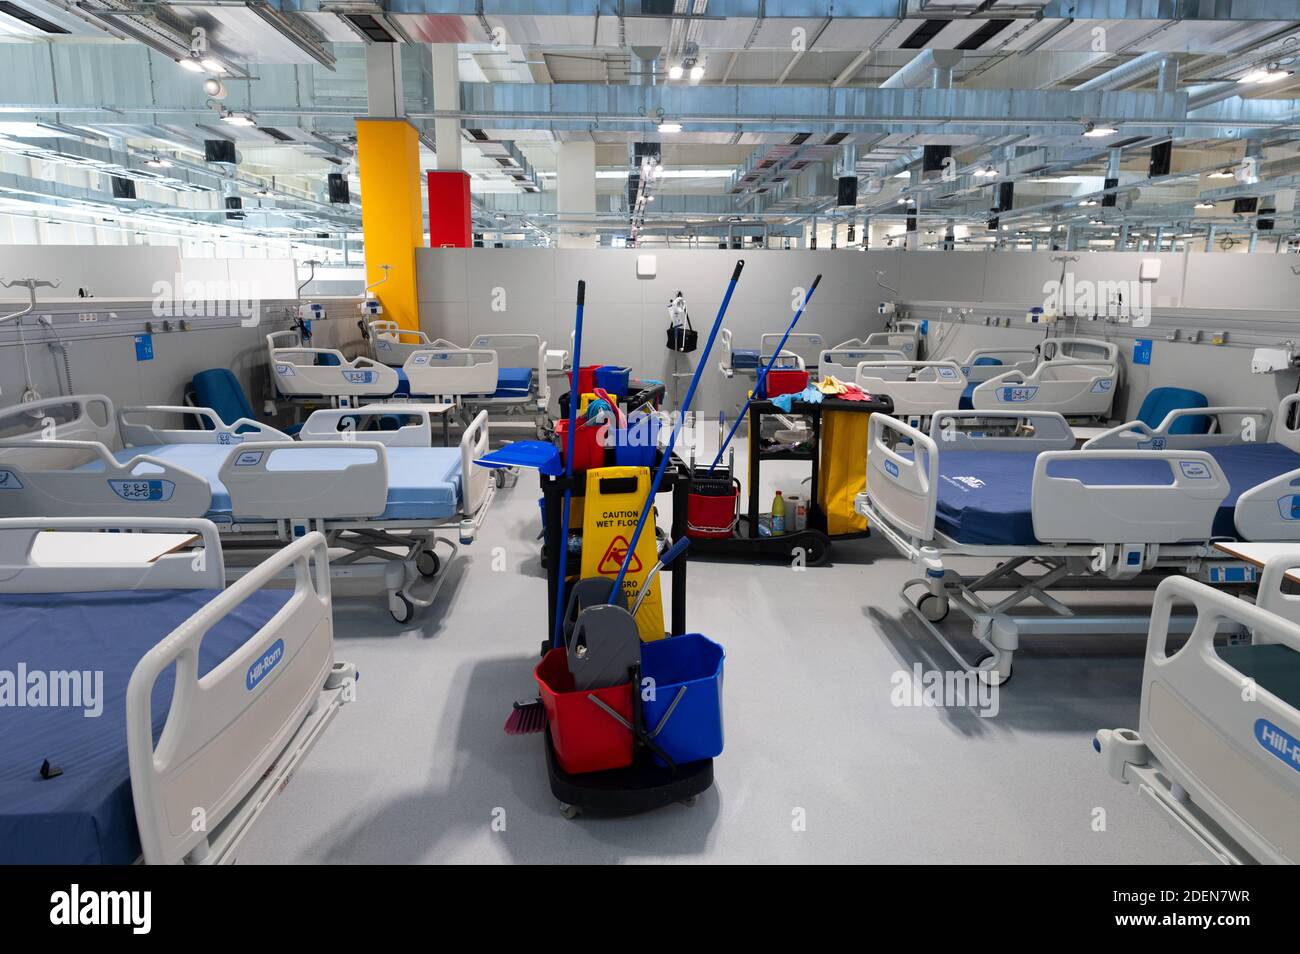 Madrid, Spain. 01st Dec, 2020. Hospital beds with cleaning tools at a hospitalization room during the inauguration day at Enfermera Isabel Zendal Hospital. The new emergencies hospital has been built in three months with an approximate cost of 100 million euros to be used for pandemics or health emergencies, with 1,000 beds that could take care of coronavirus (COVID-19) patients. Credit: Marcos del Mazo/Alamy Live News Stock Photo